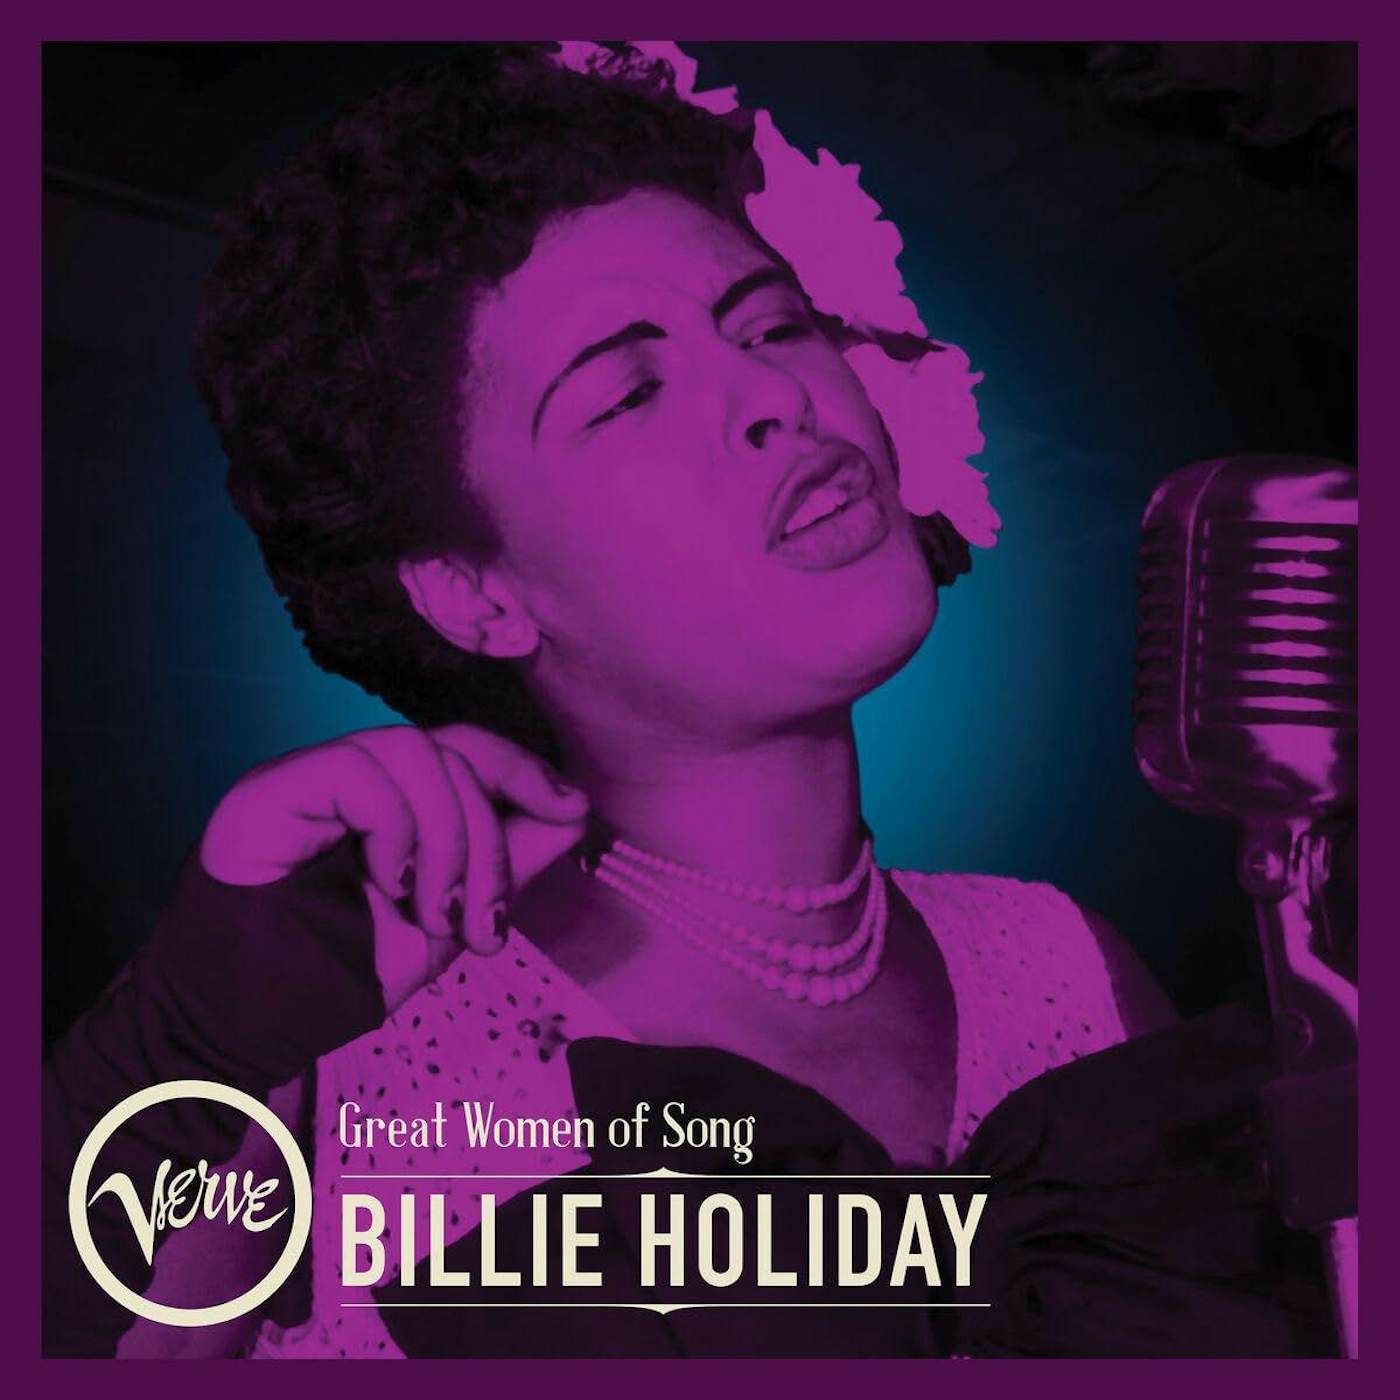 Great Women Of Song: Billie Holiday Vinyl Record